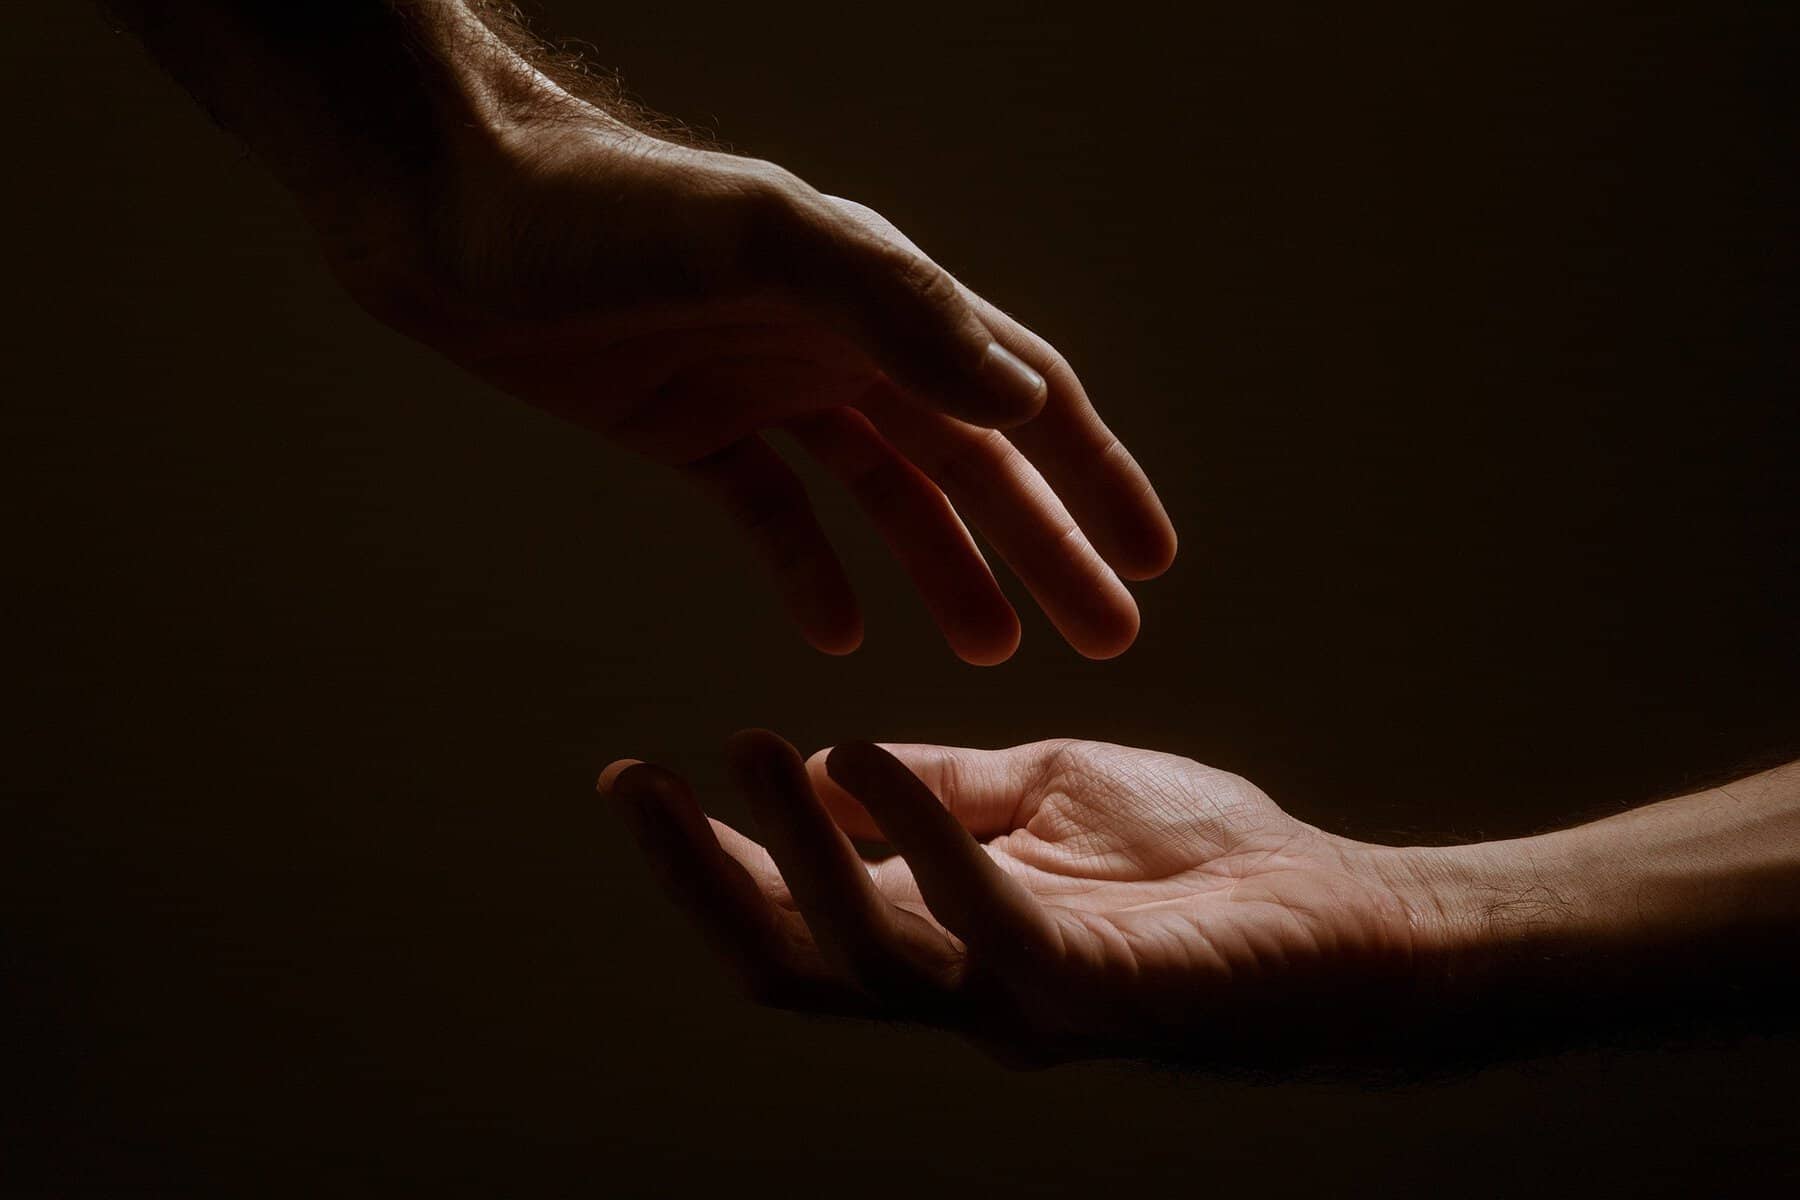 This moody image shows one hand extended out and above it another hand is reaching down toward it.